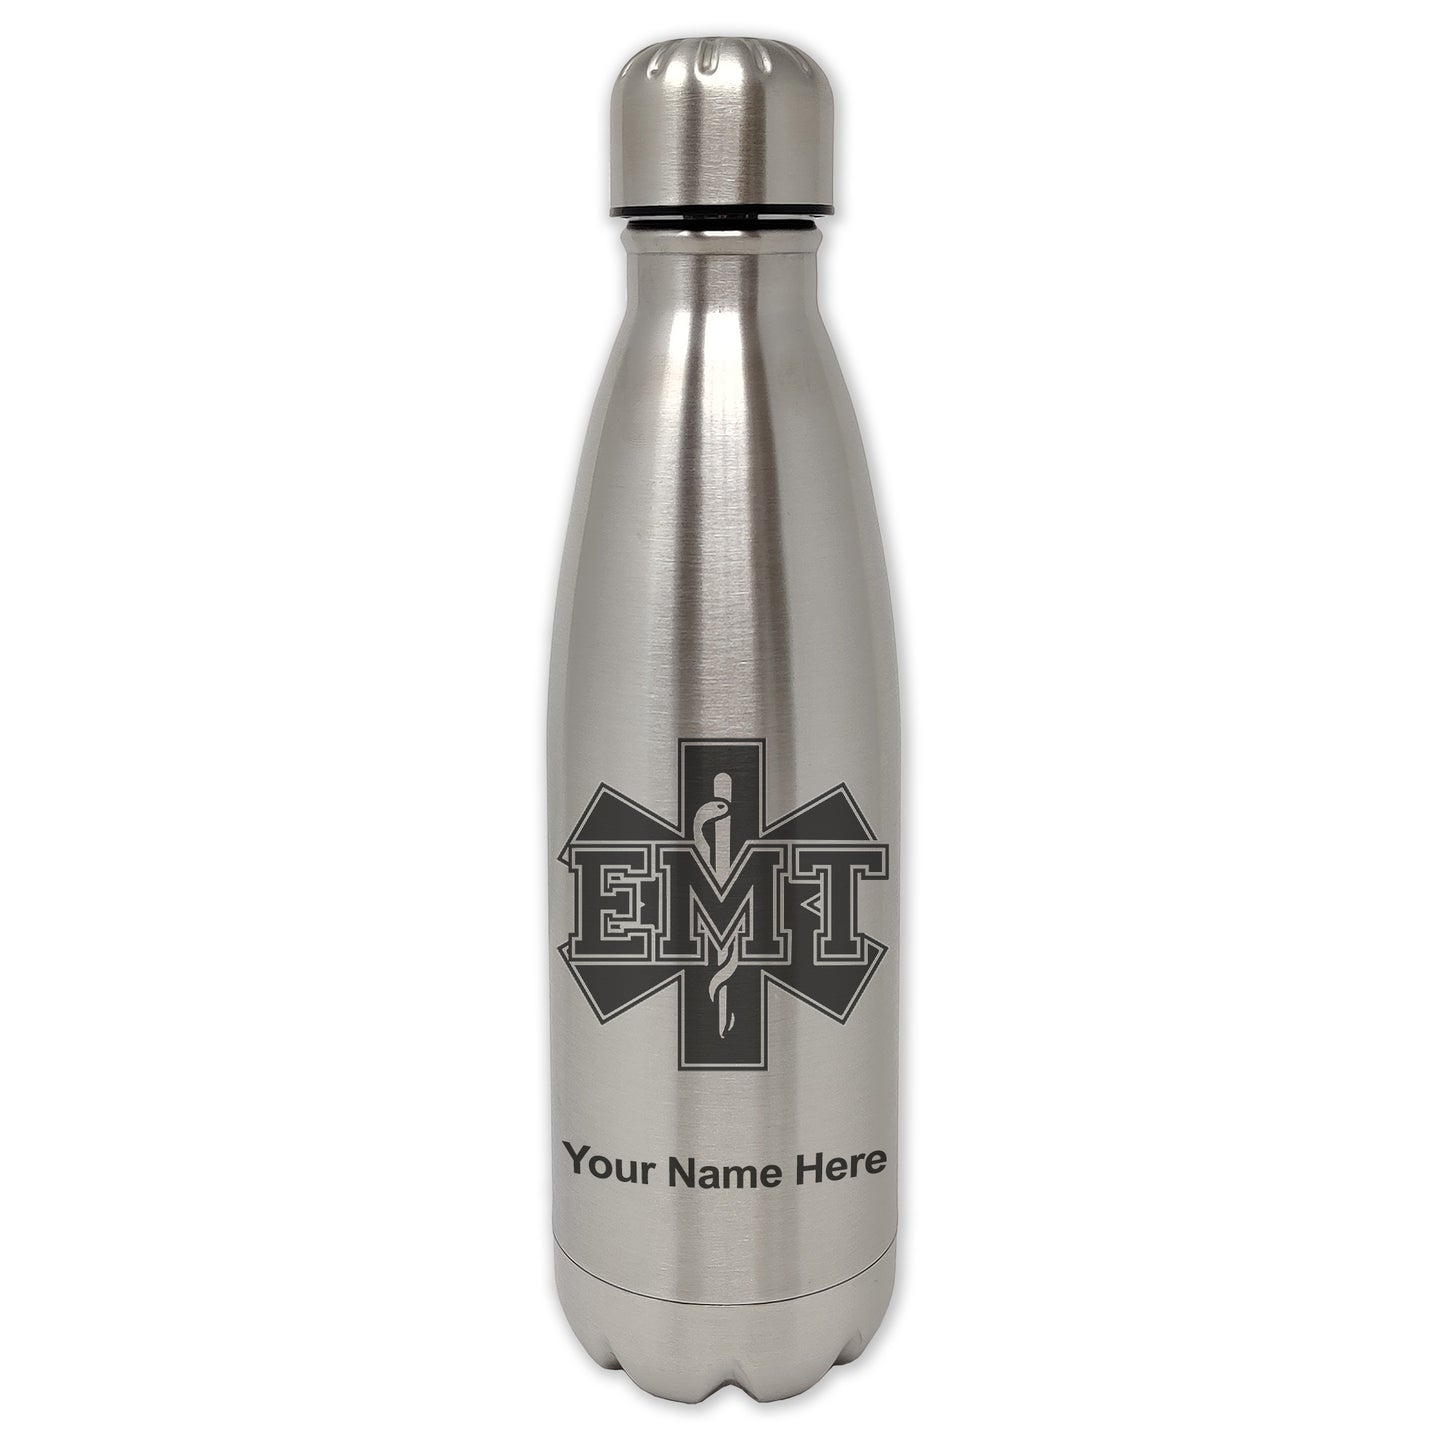 LaserGram Double Wall Water Bottle, EMT Emergency Medical Technician, Personalized Engraving Included